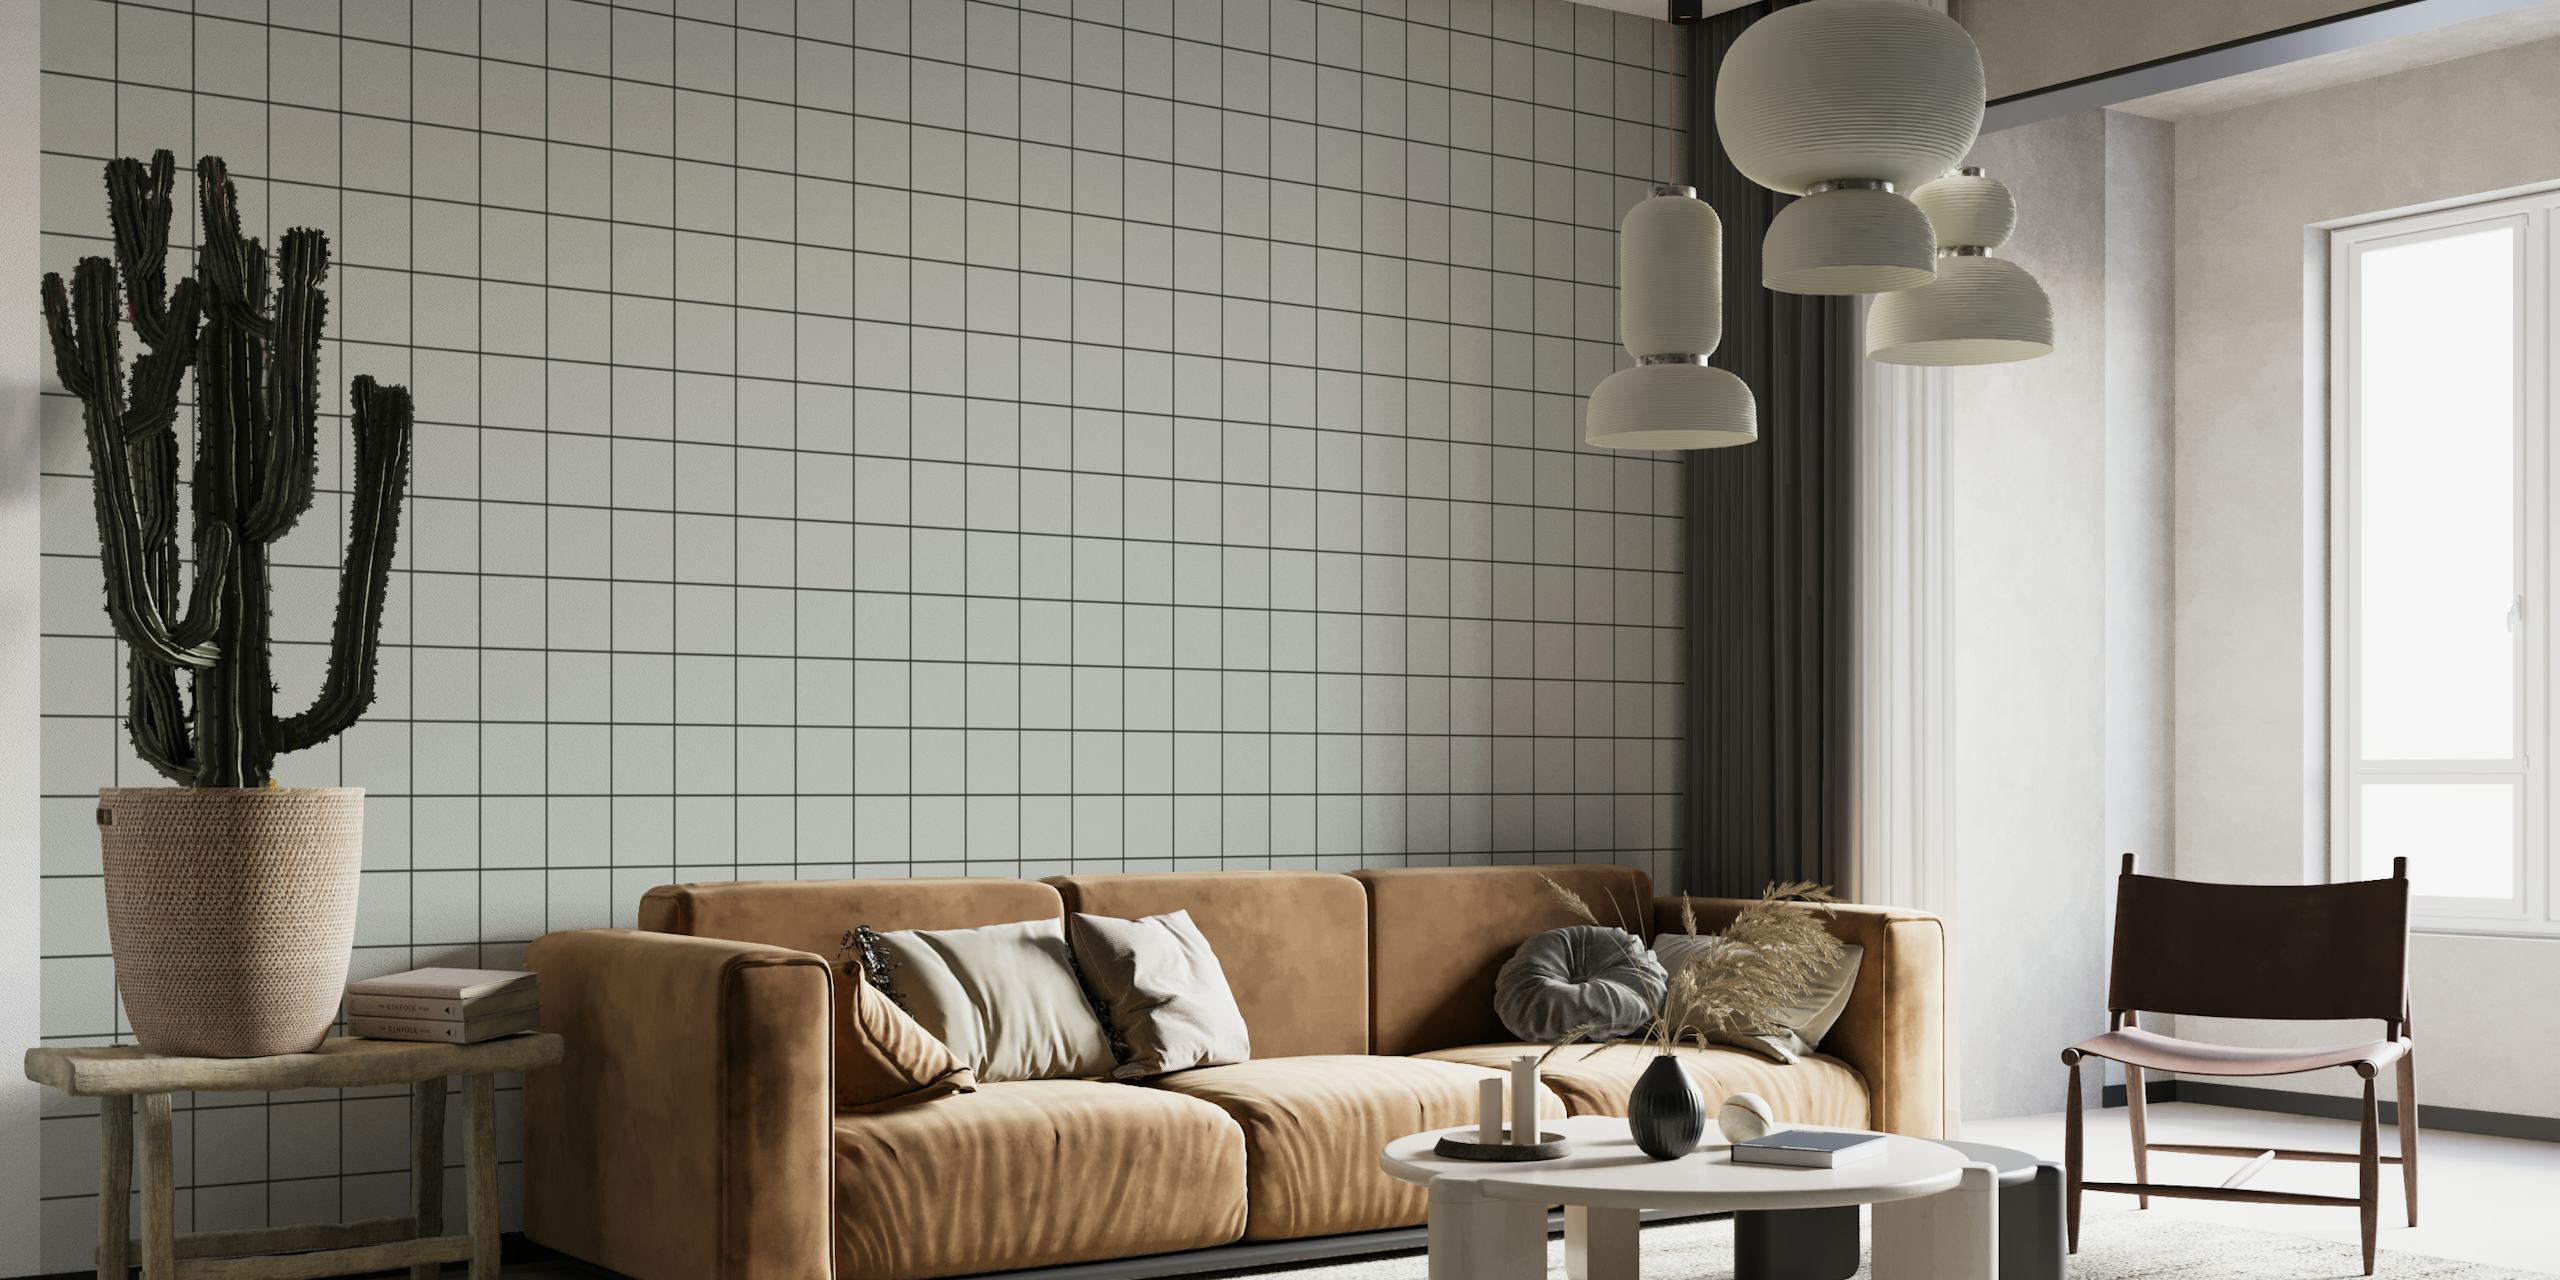 Small grid pattern wall mural in gray for contemporary interior decor